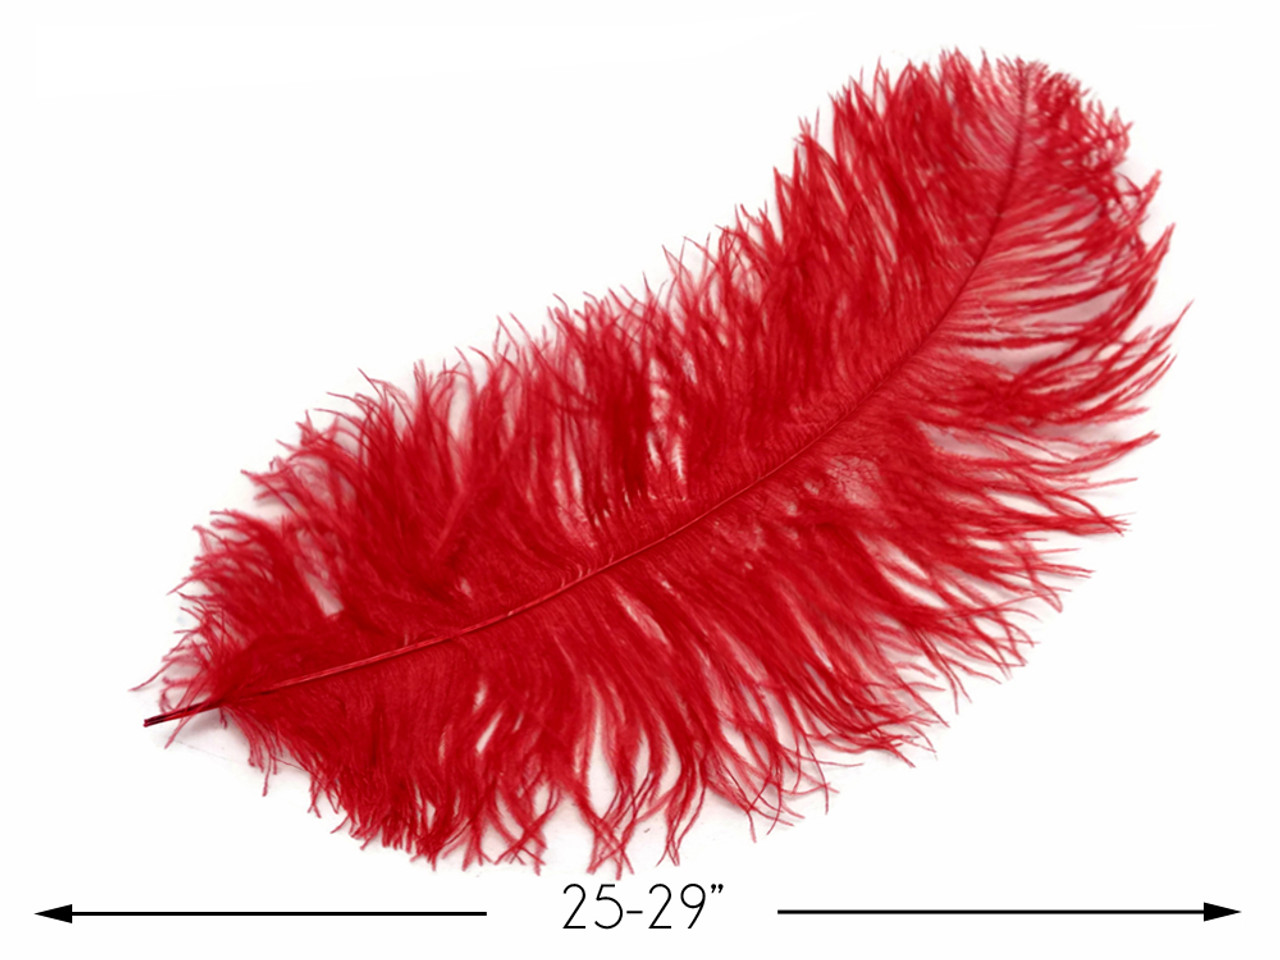 Red Feathers, 2 Pieces, 6-7 Inches 